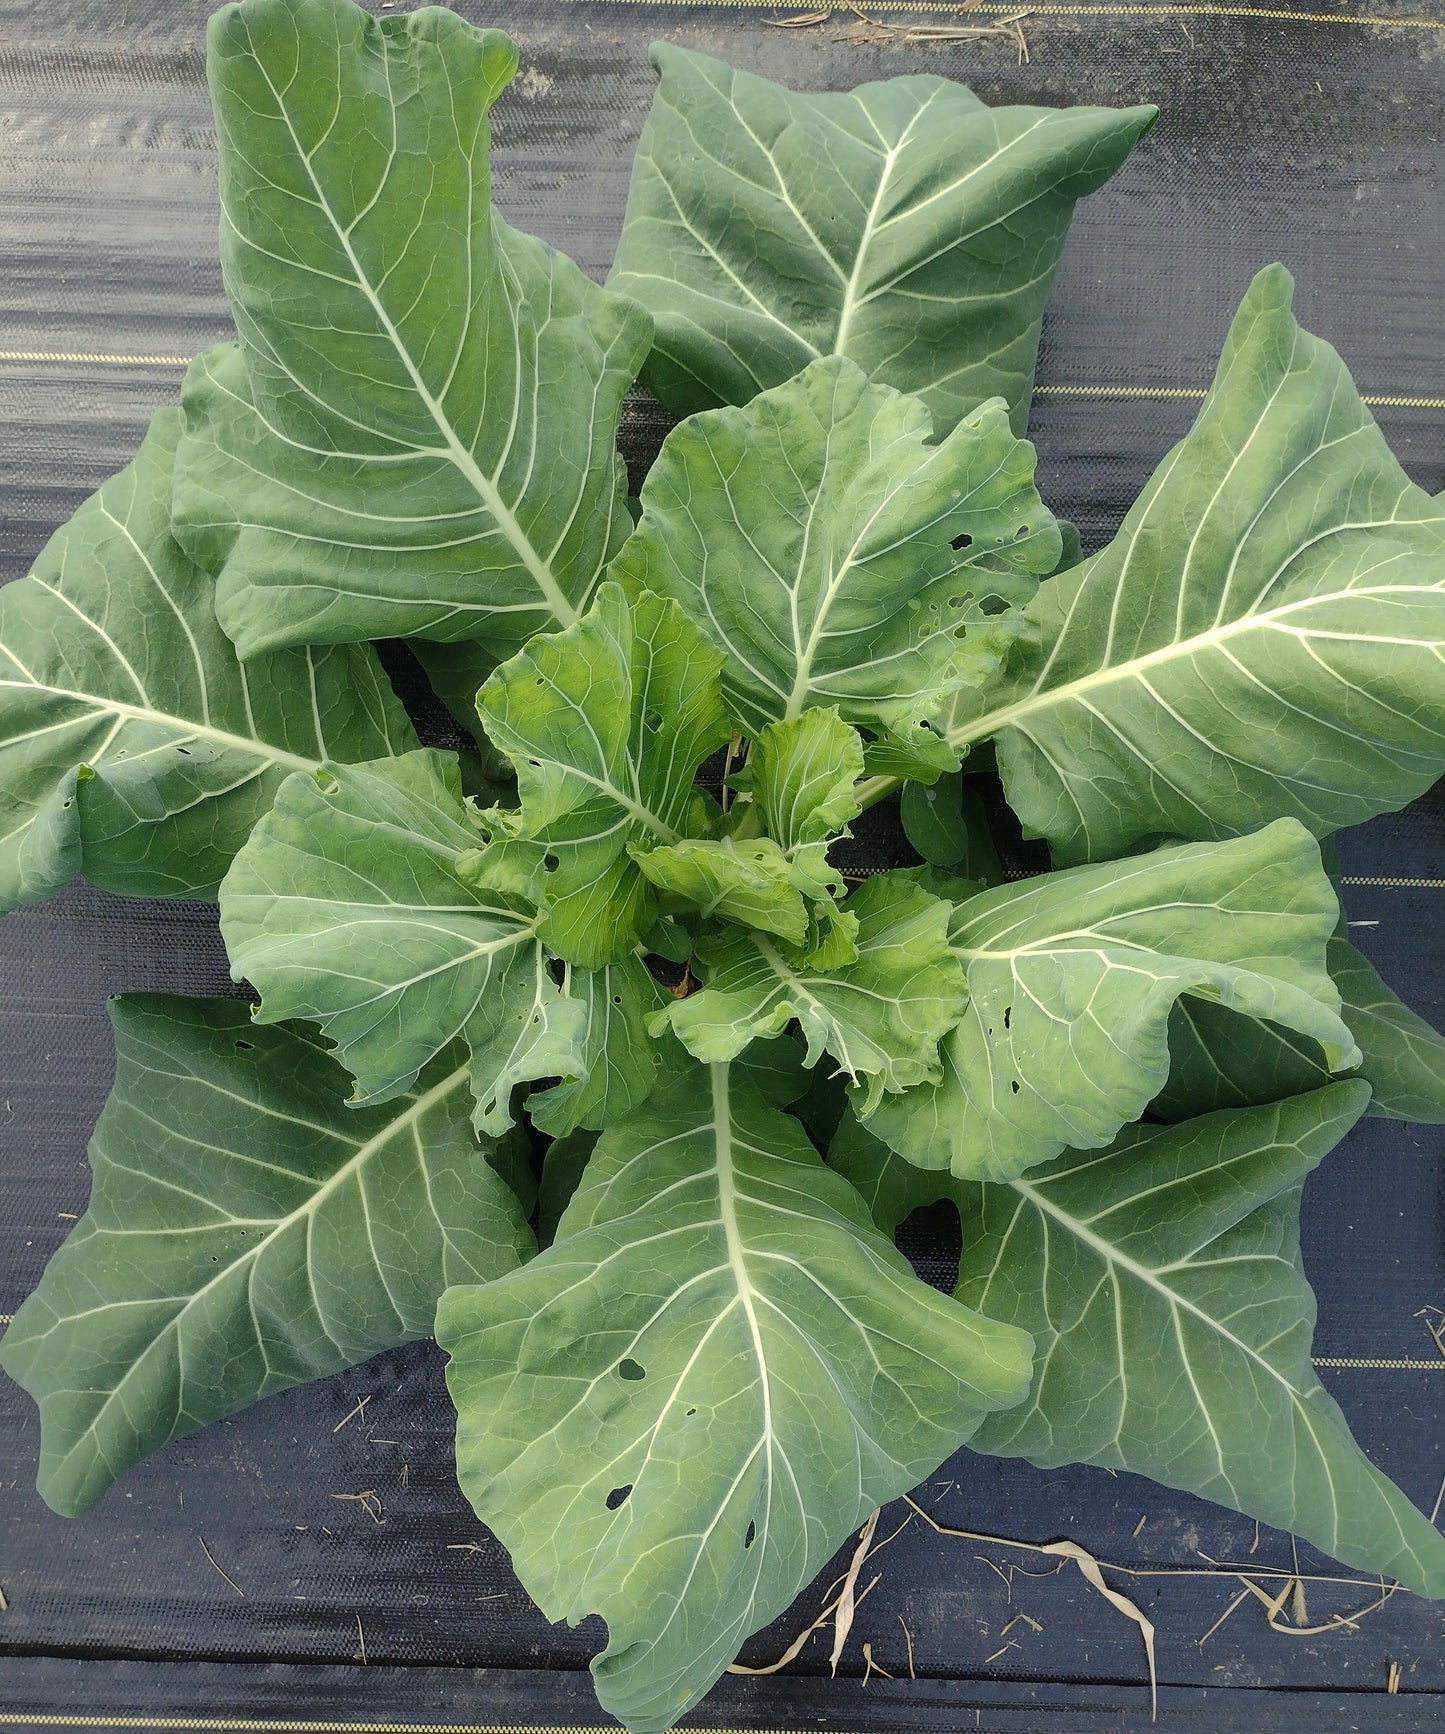 Moses Smith Yellow Cabbage Collard